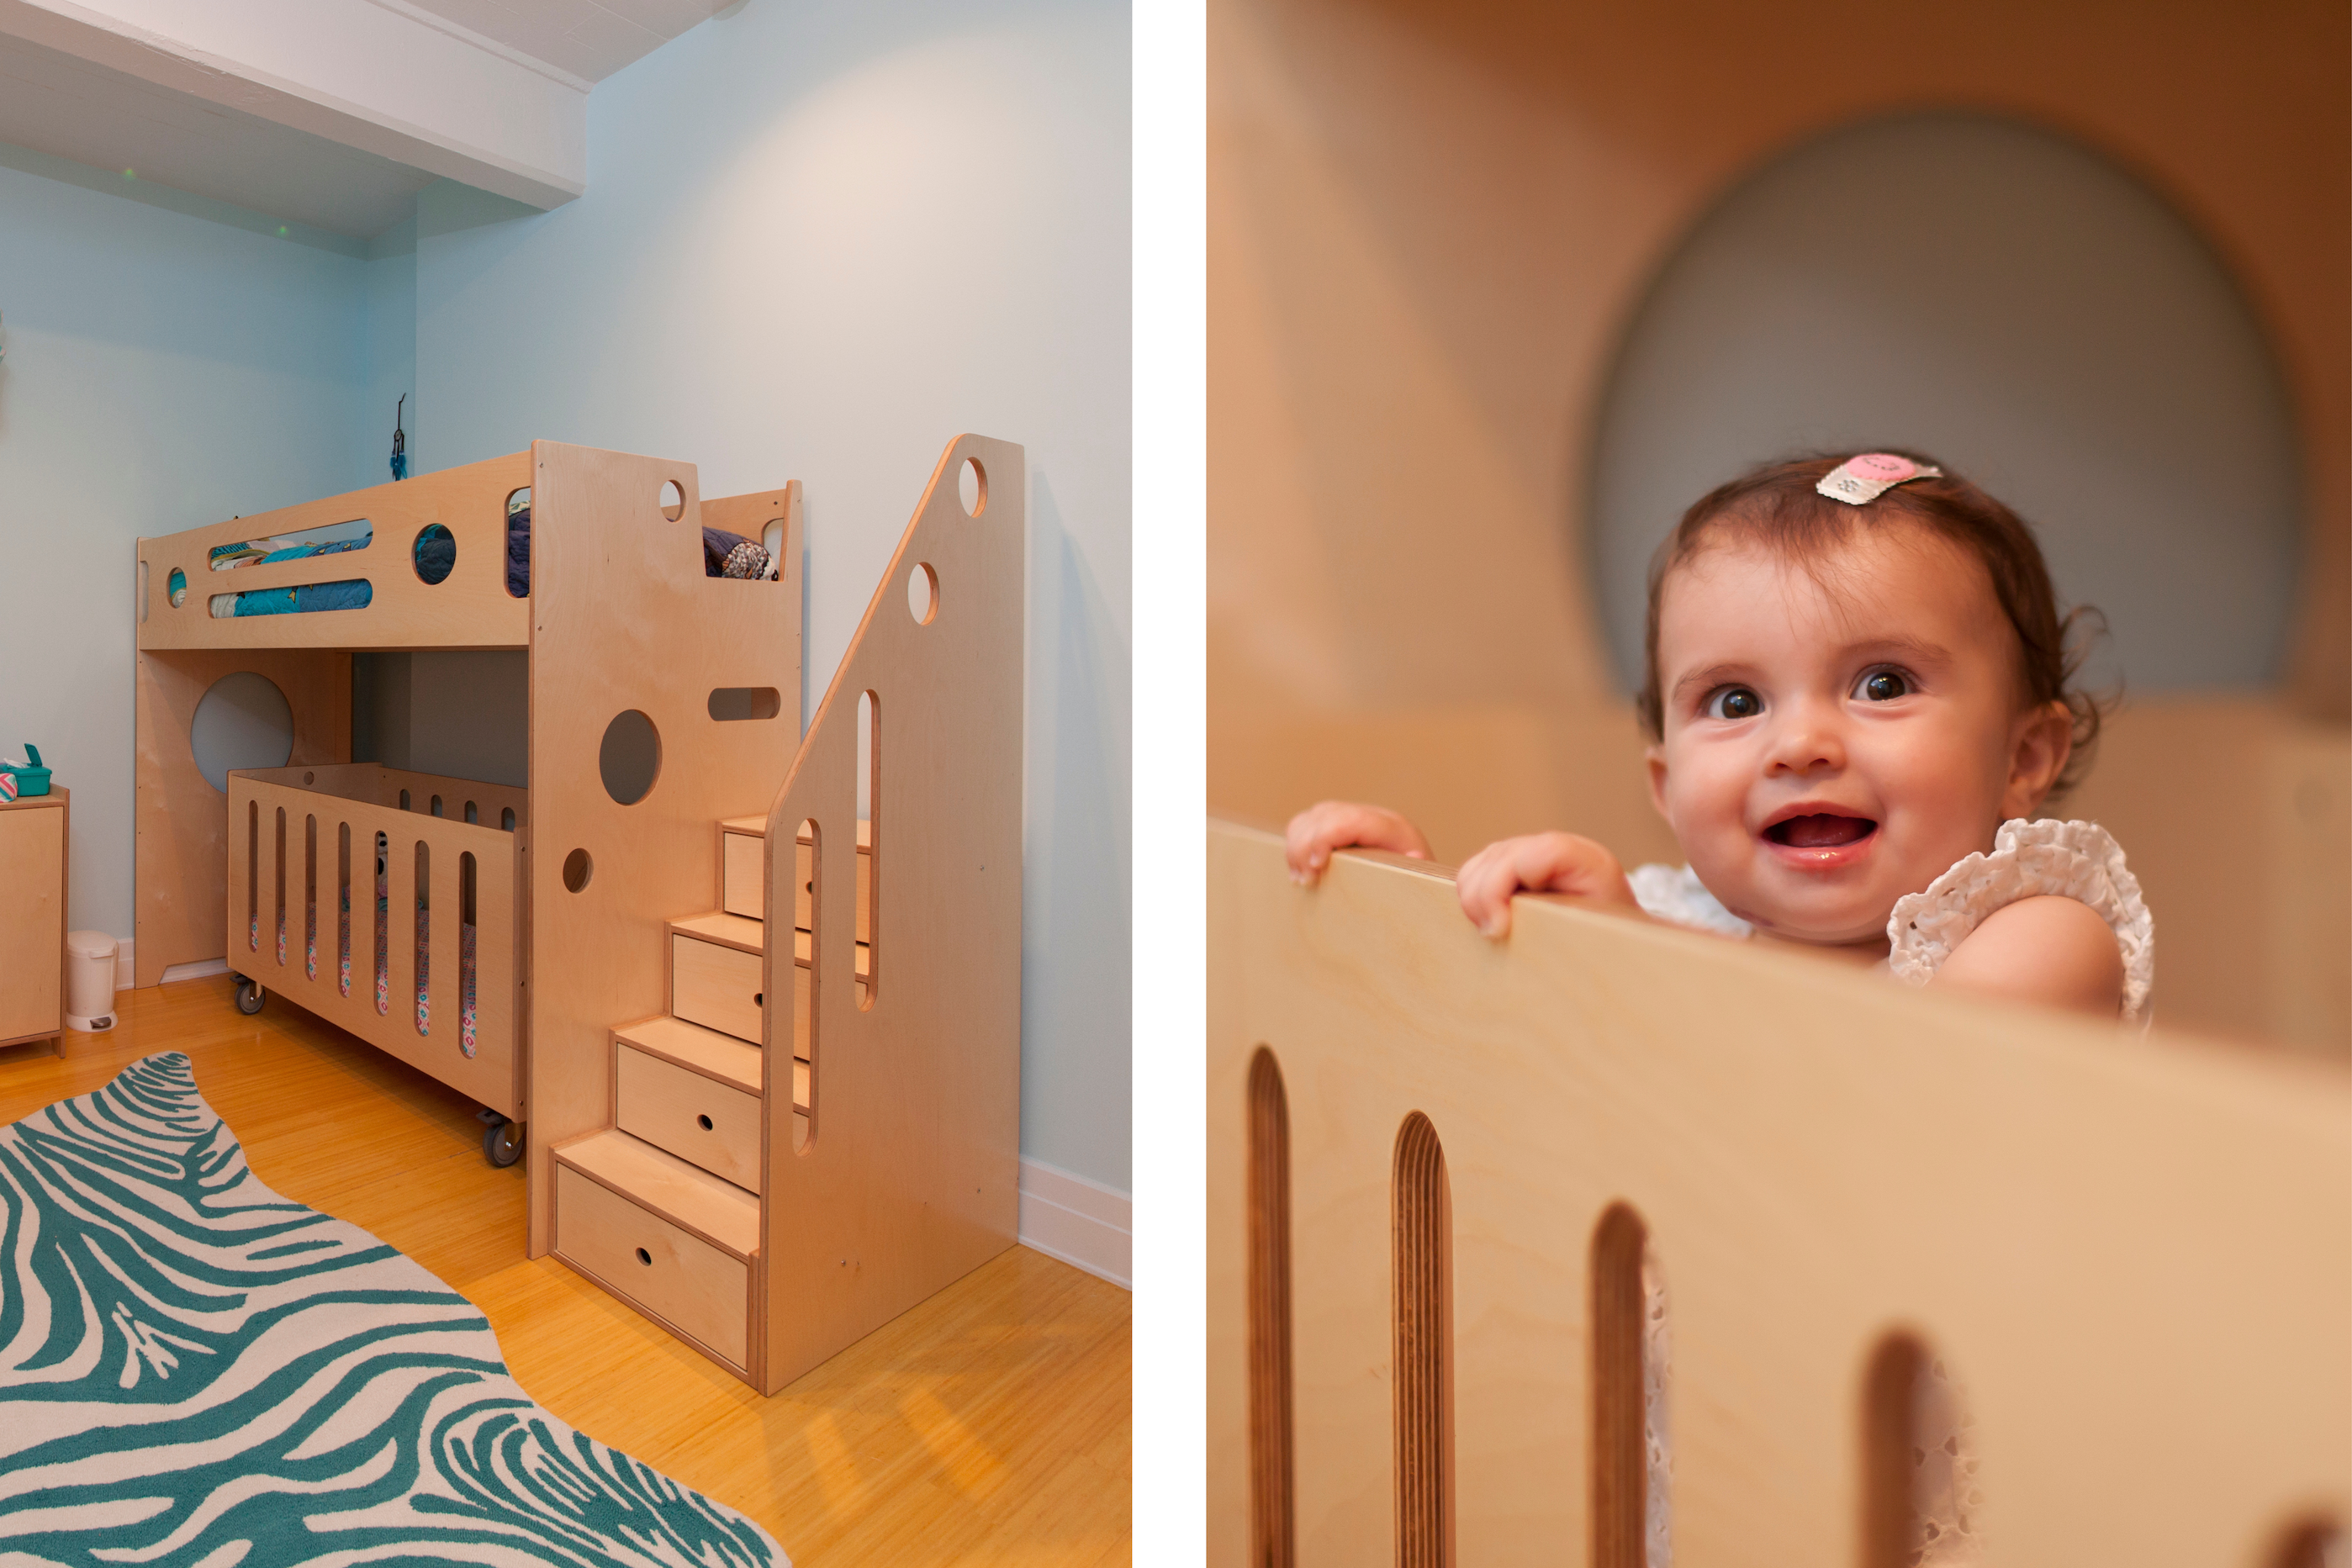 Collage of images: left, a room with a wooden bunk bed and drawers; right, a smiling baby peeking from a wooden crib.